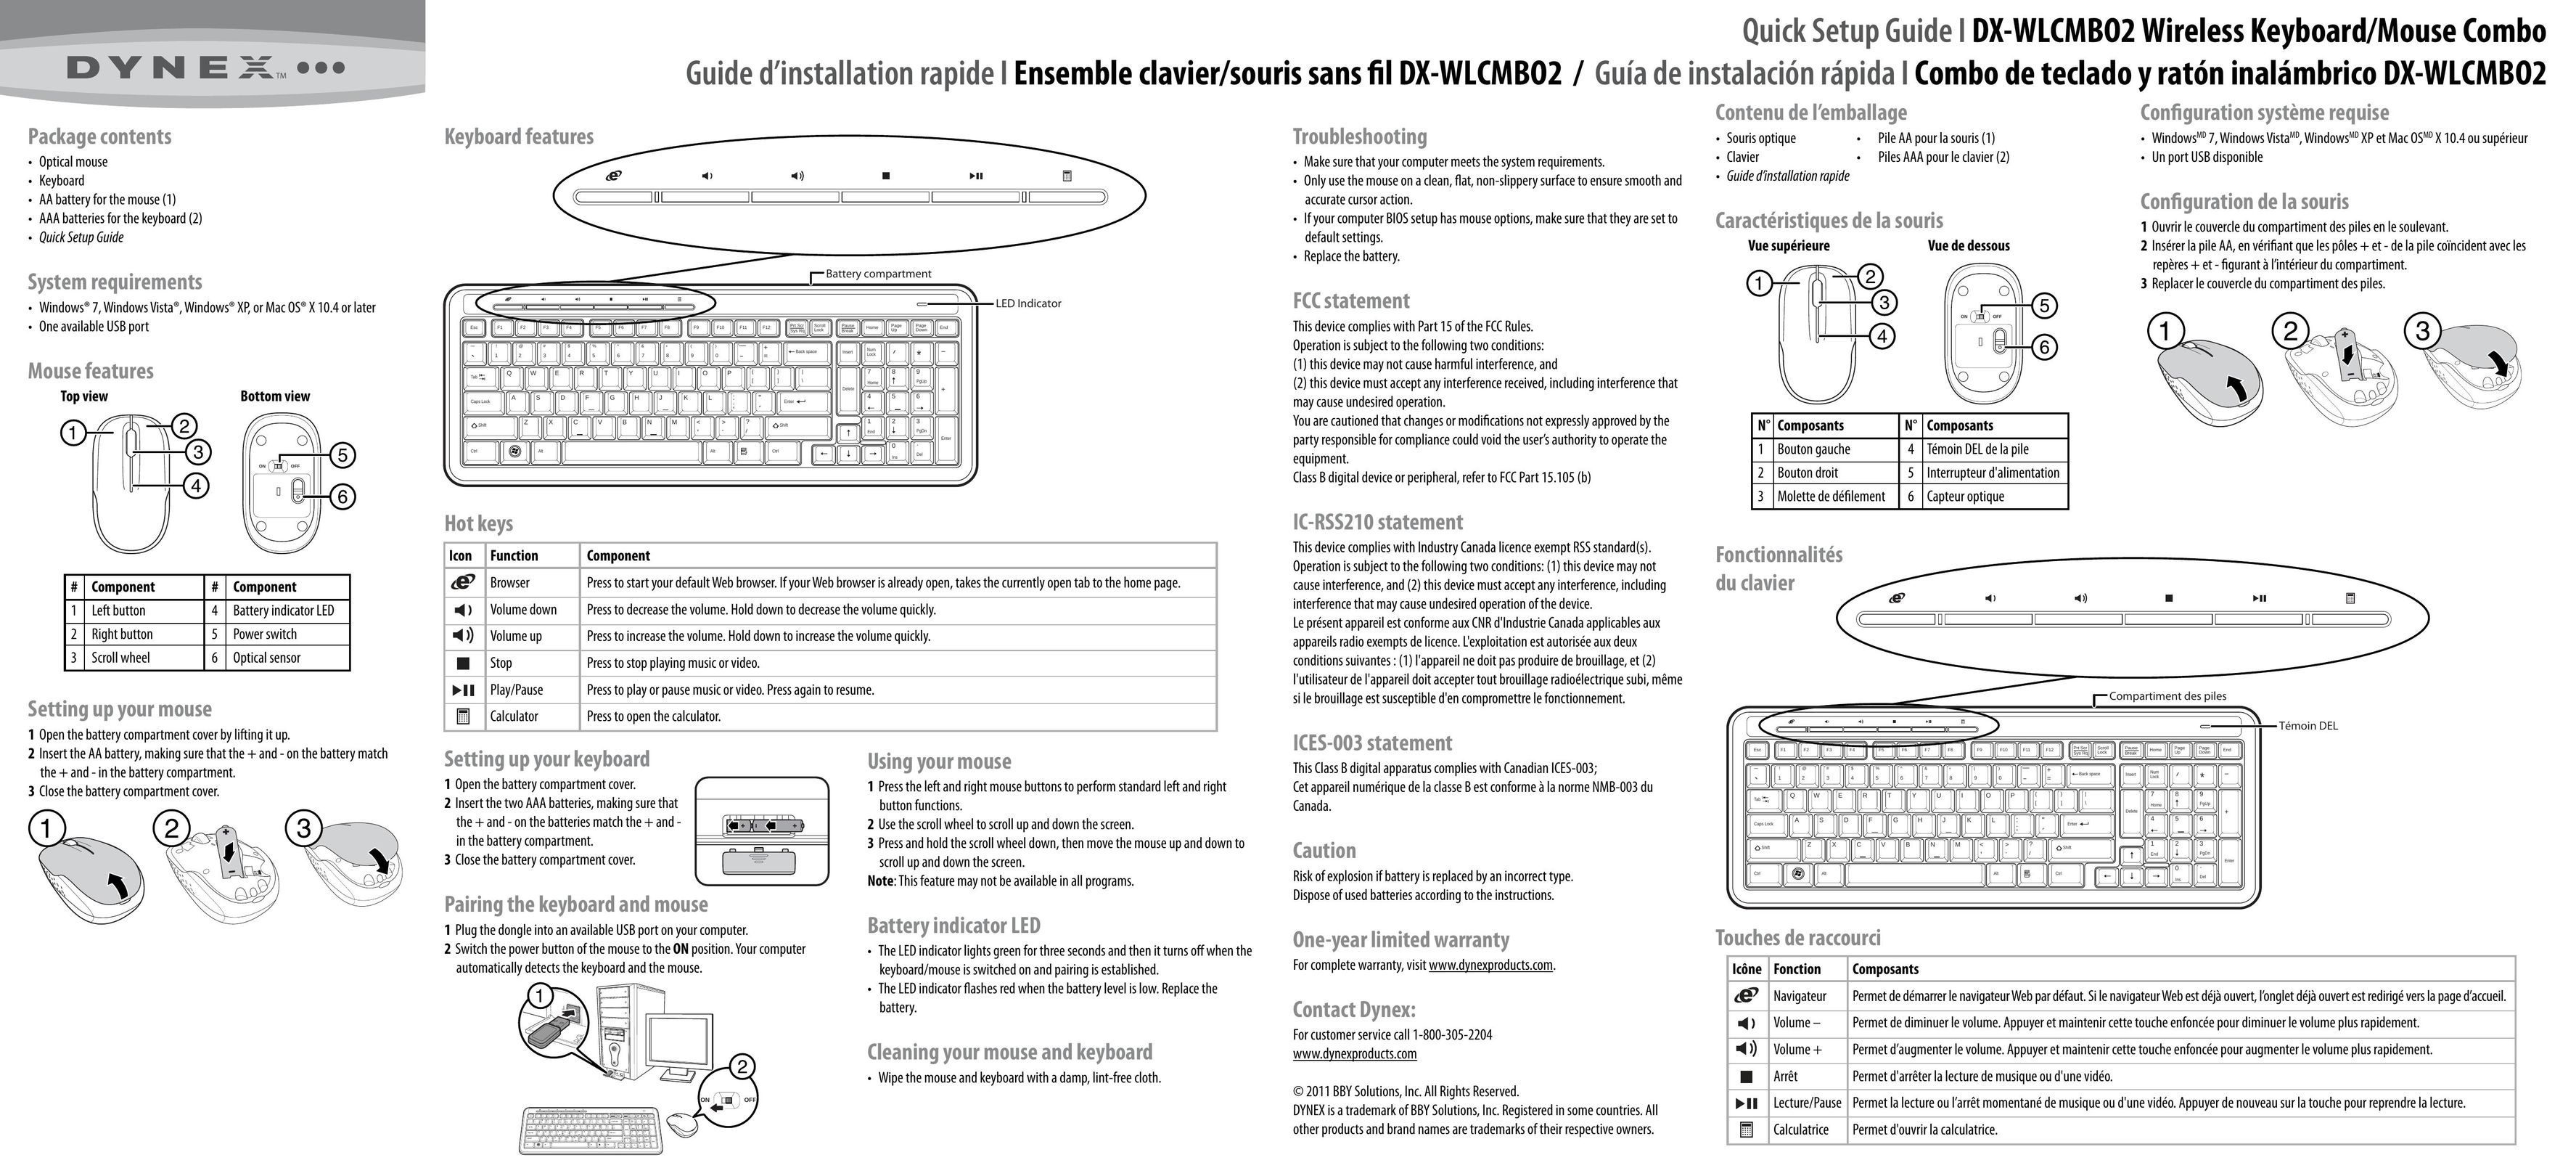 Dynex DX-WLCMBO2 Laptop User Manual (Page 1)